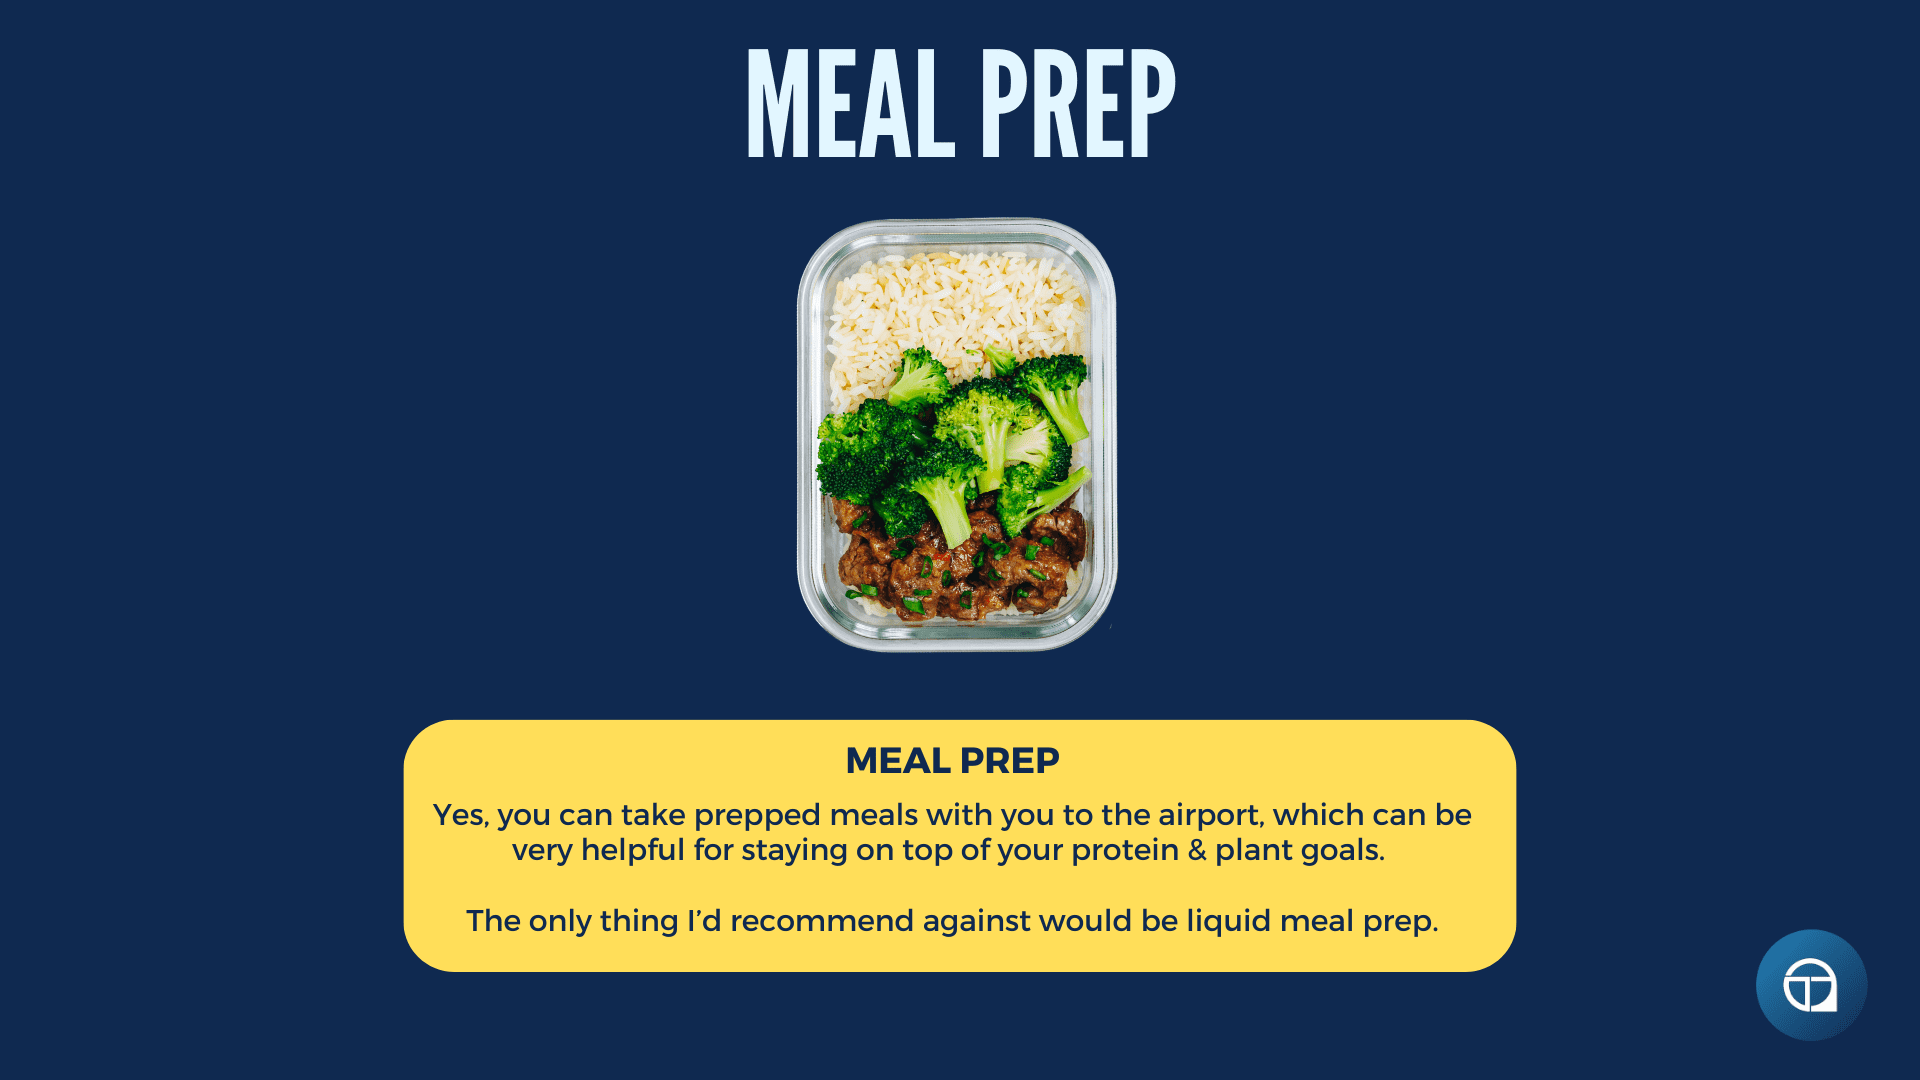 managing your nutrition while travelling, meal prep